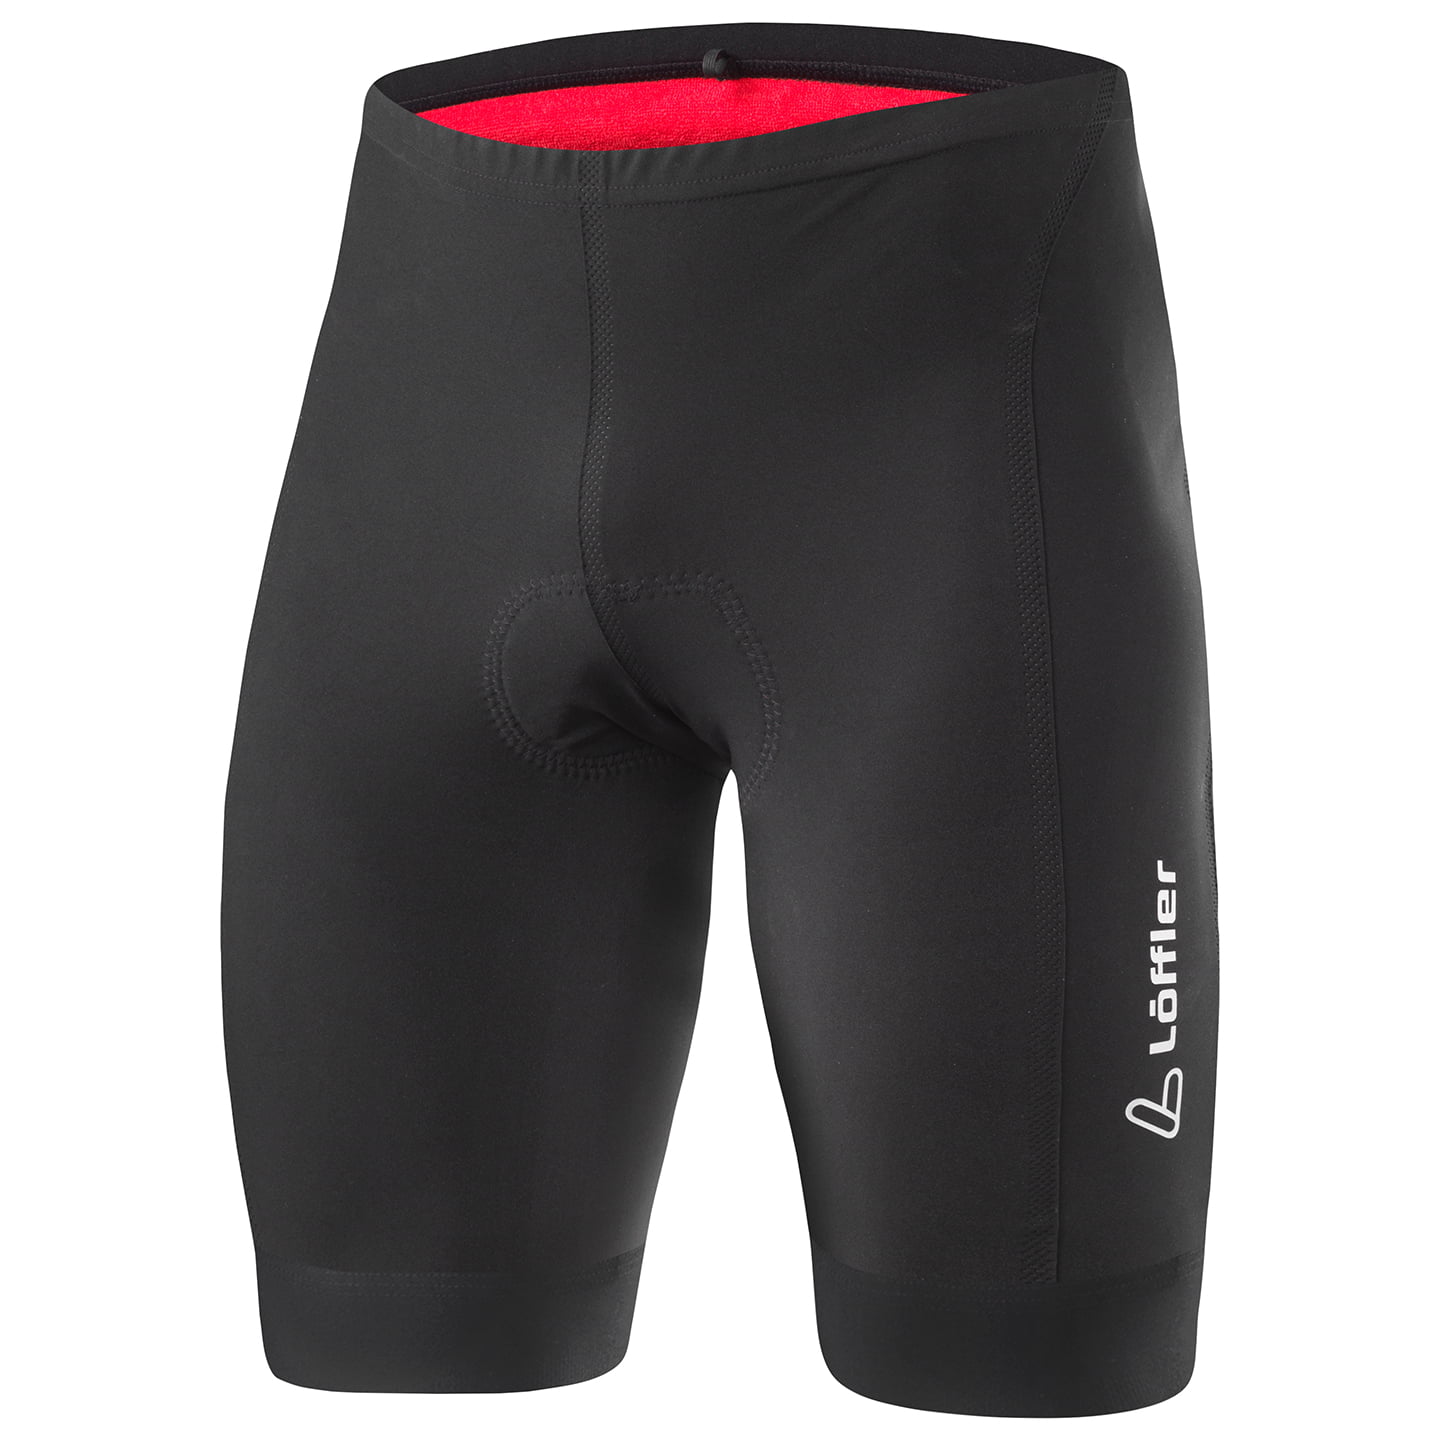 LOFFLER hotBOND Cycling Shorts Cycling Shorts, for men, size S, Cycle trousers, Cycle clothing